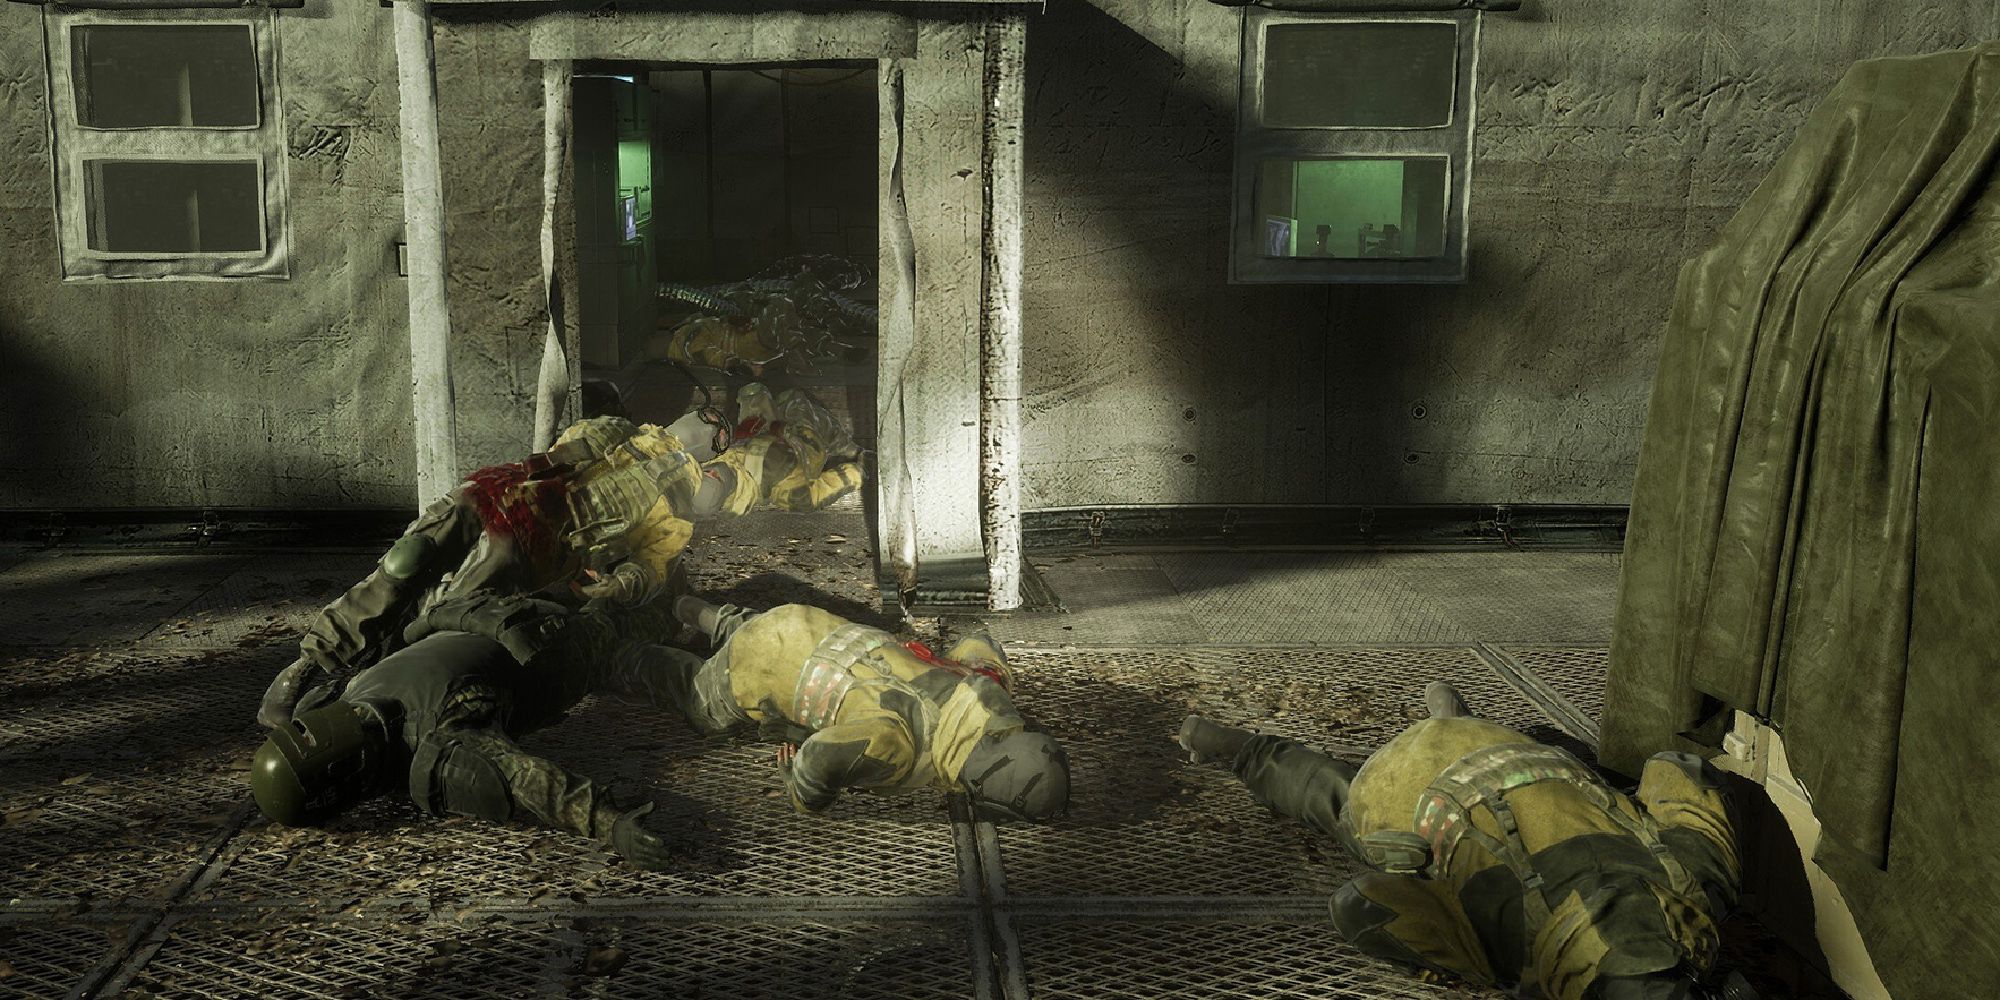 Chernobylite - A Whole Pile Of Immovable NAR Soldier Bodies